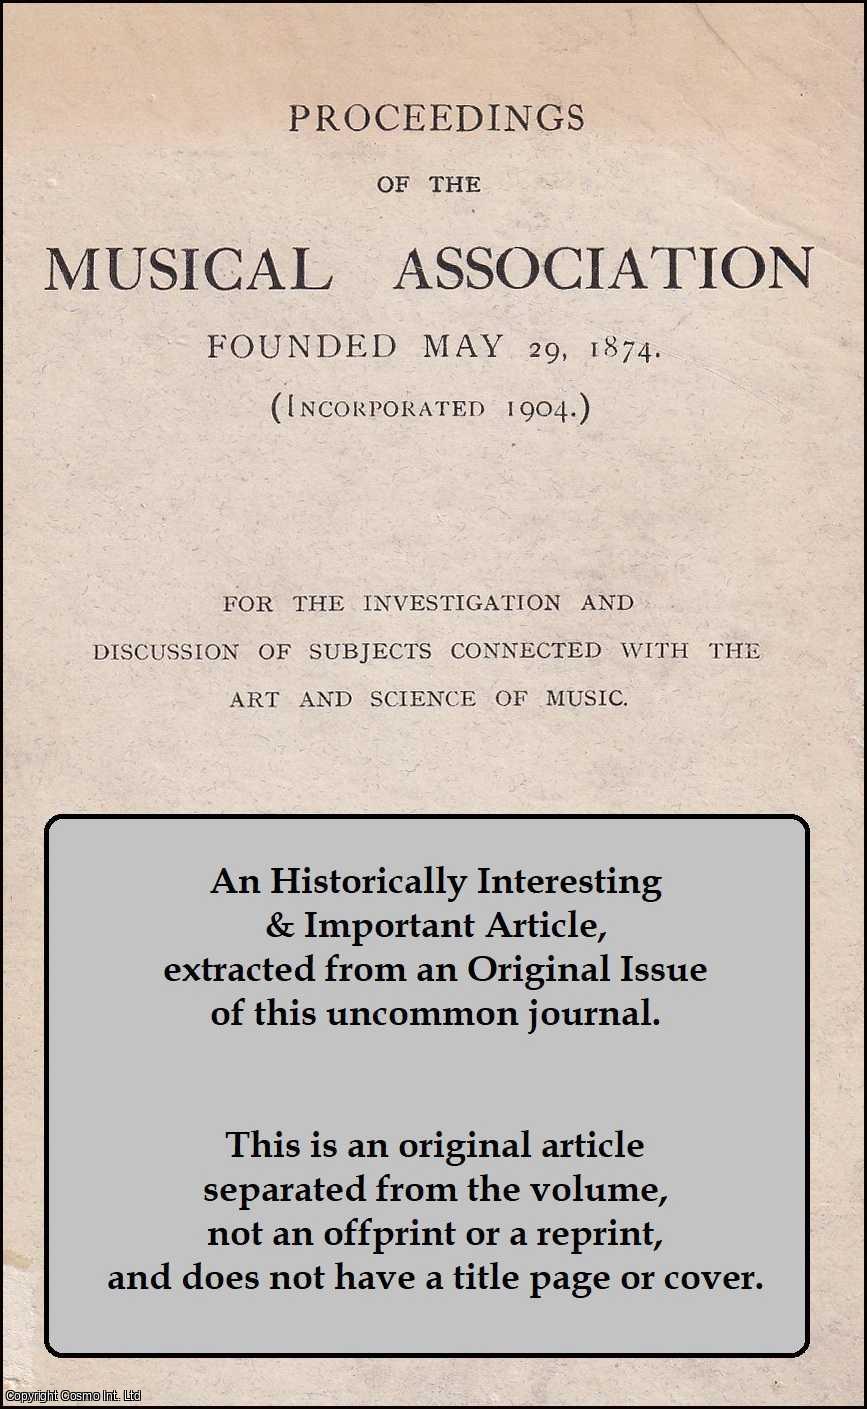 Philip E. Vernon - The Apprehension and Cognition of Music. An original article from The Proceedings of The Musical Association, 1933.